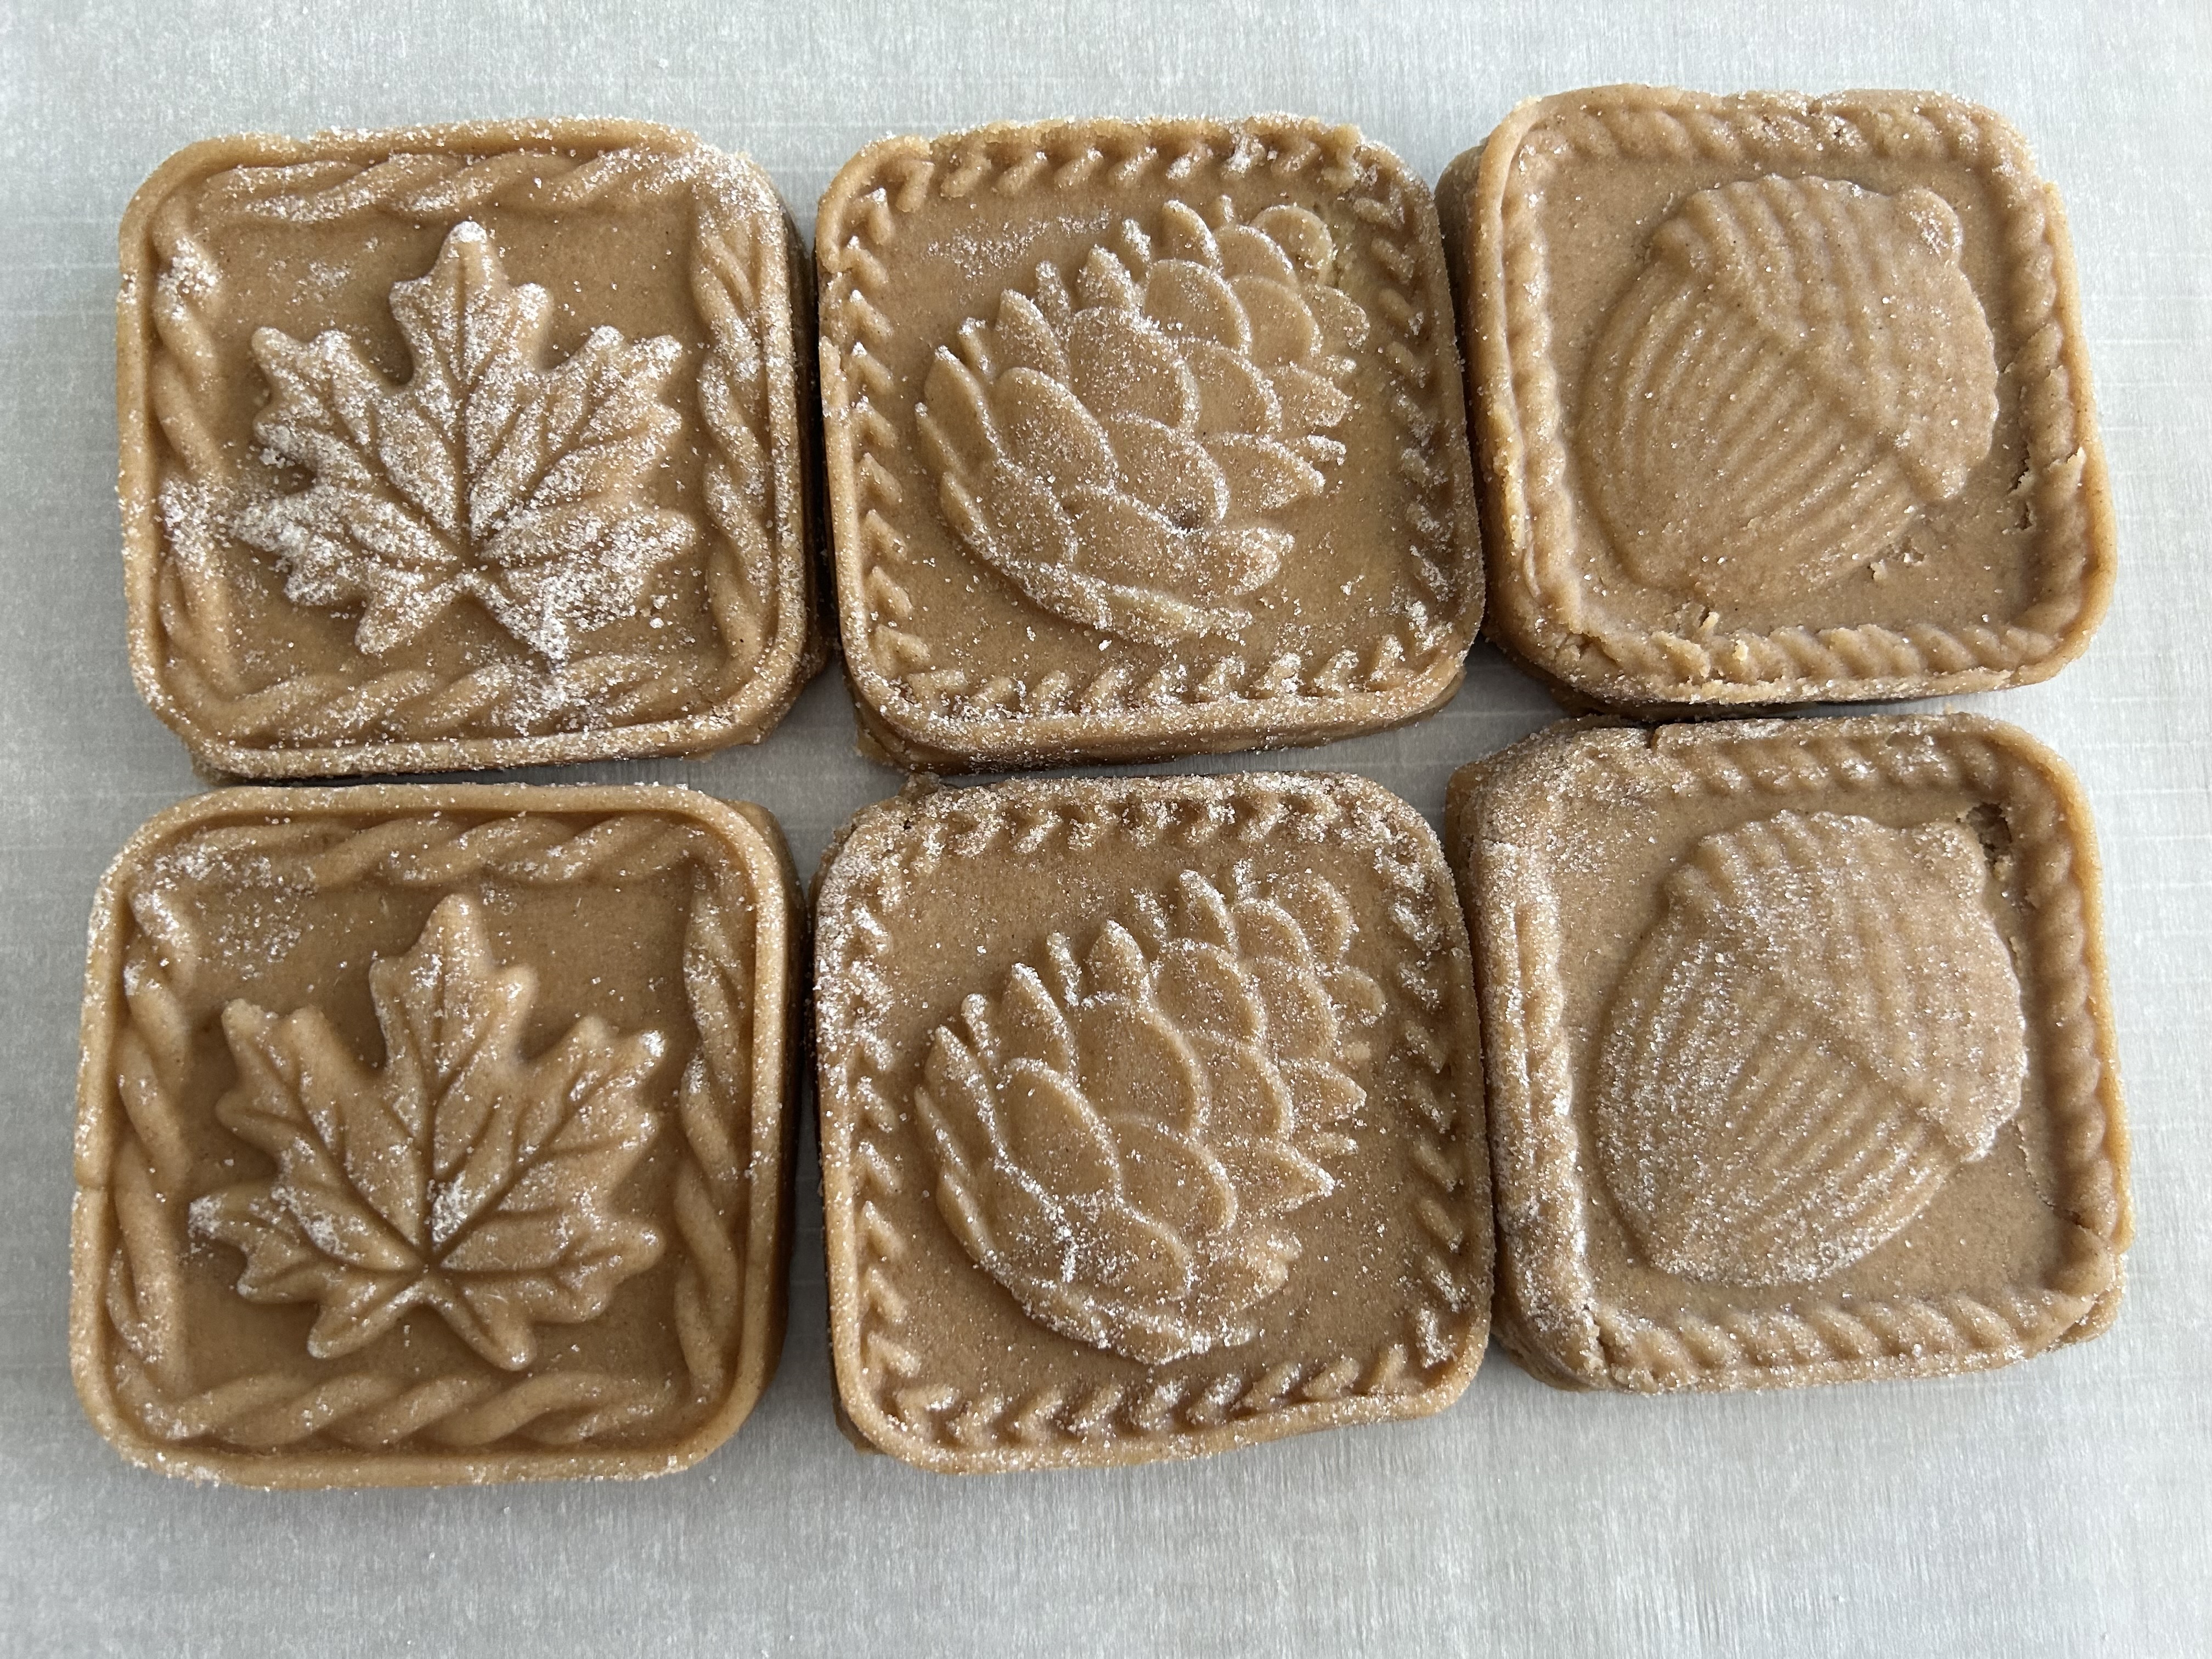 The Pastry Chef's Baking: Stamped Cookies #31 Fall Spice Stamped